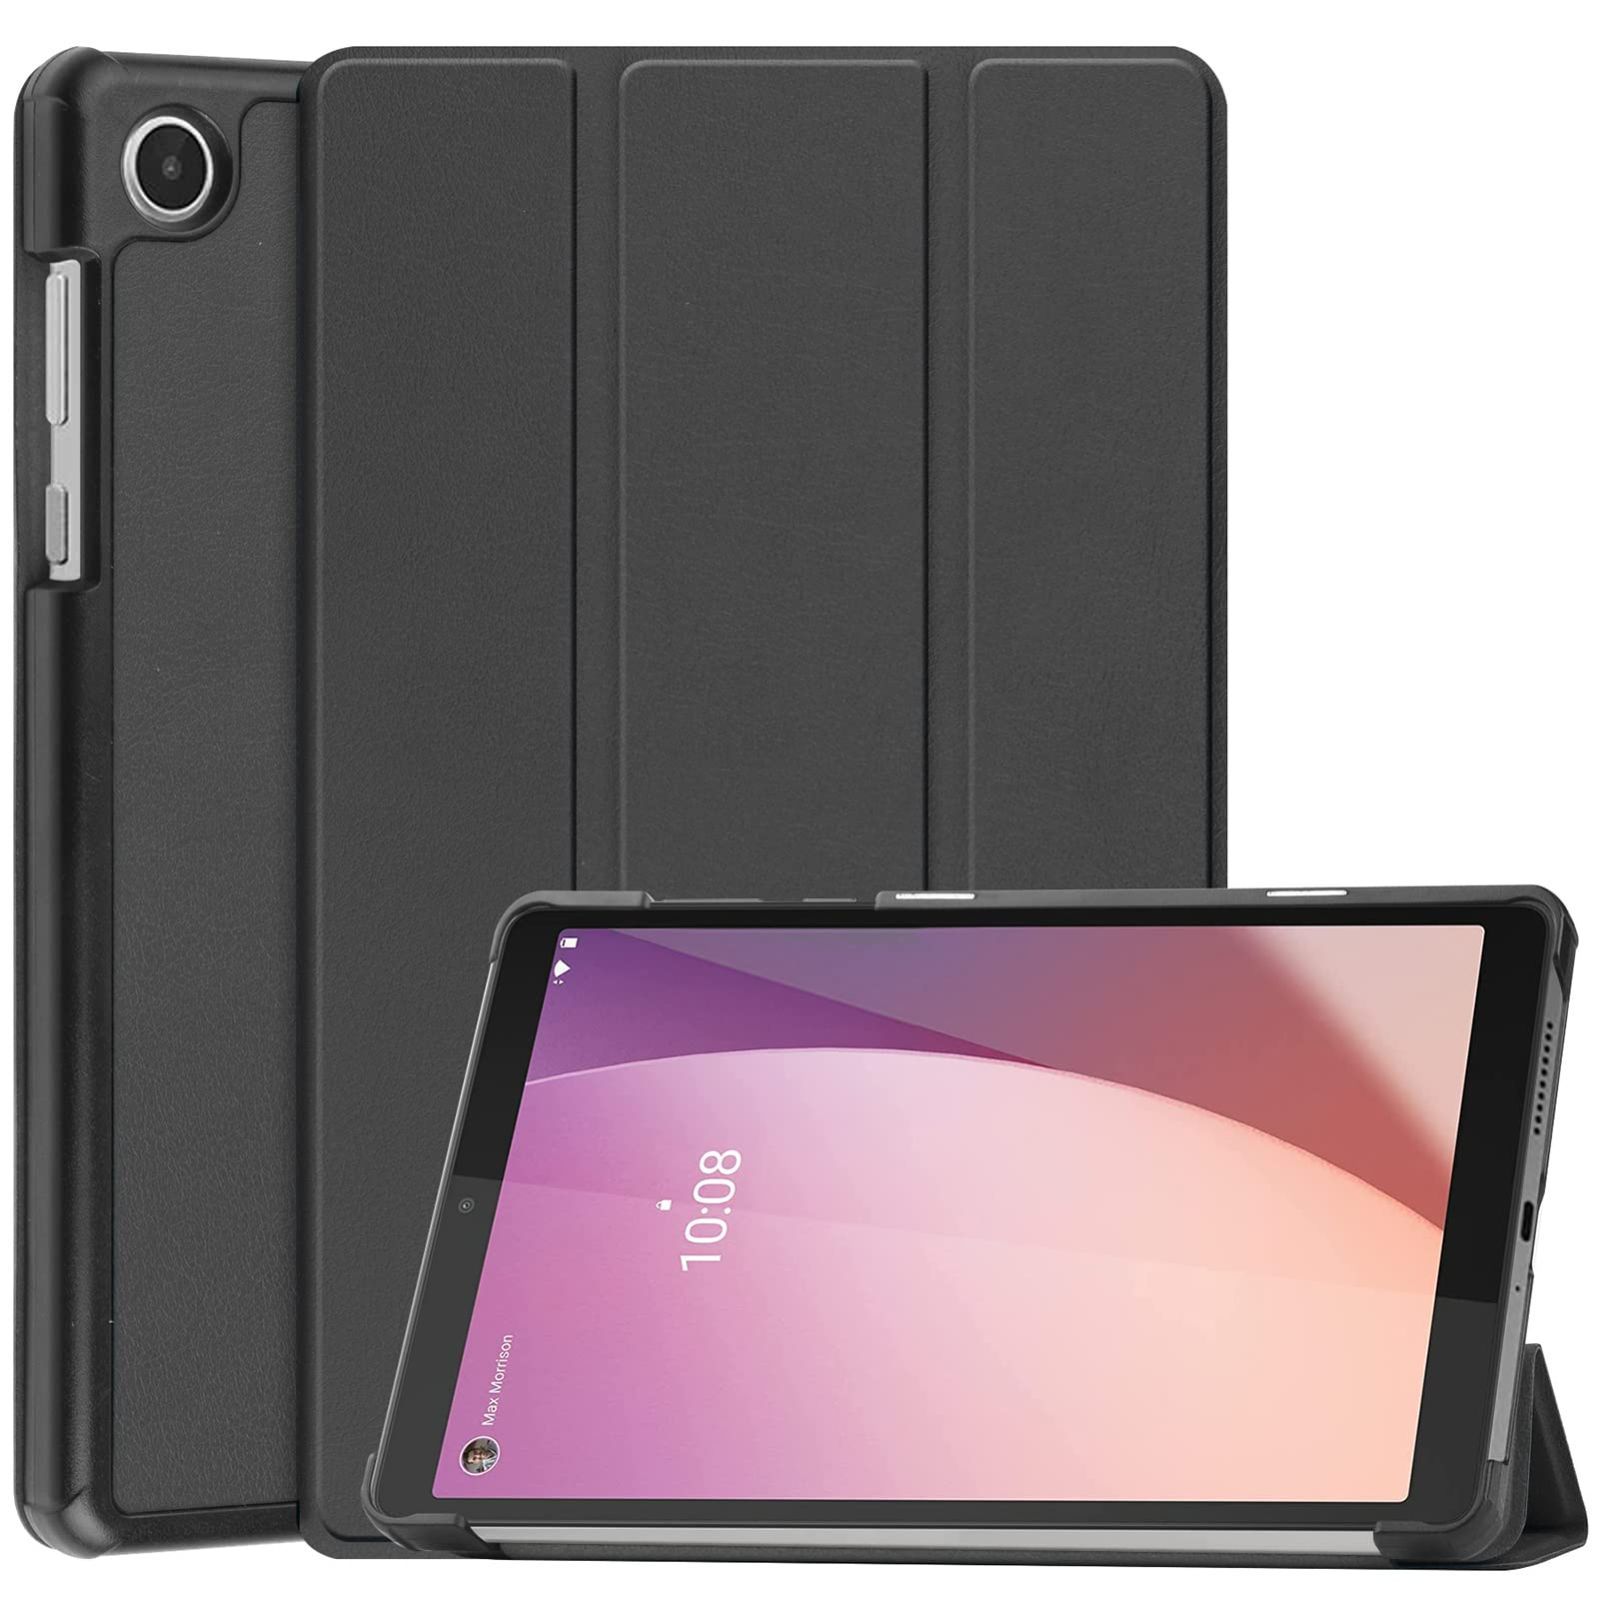 LAVIE T8 タブレット8インチAndroid